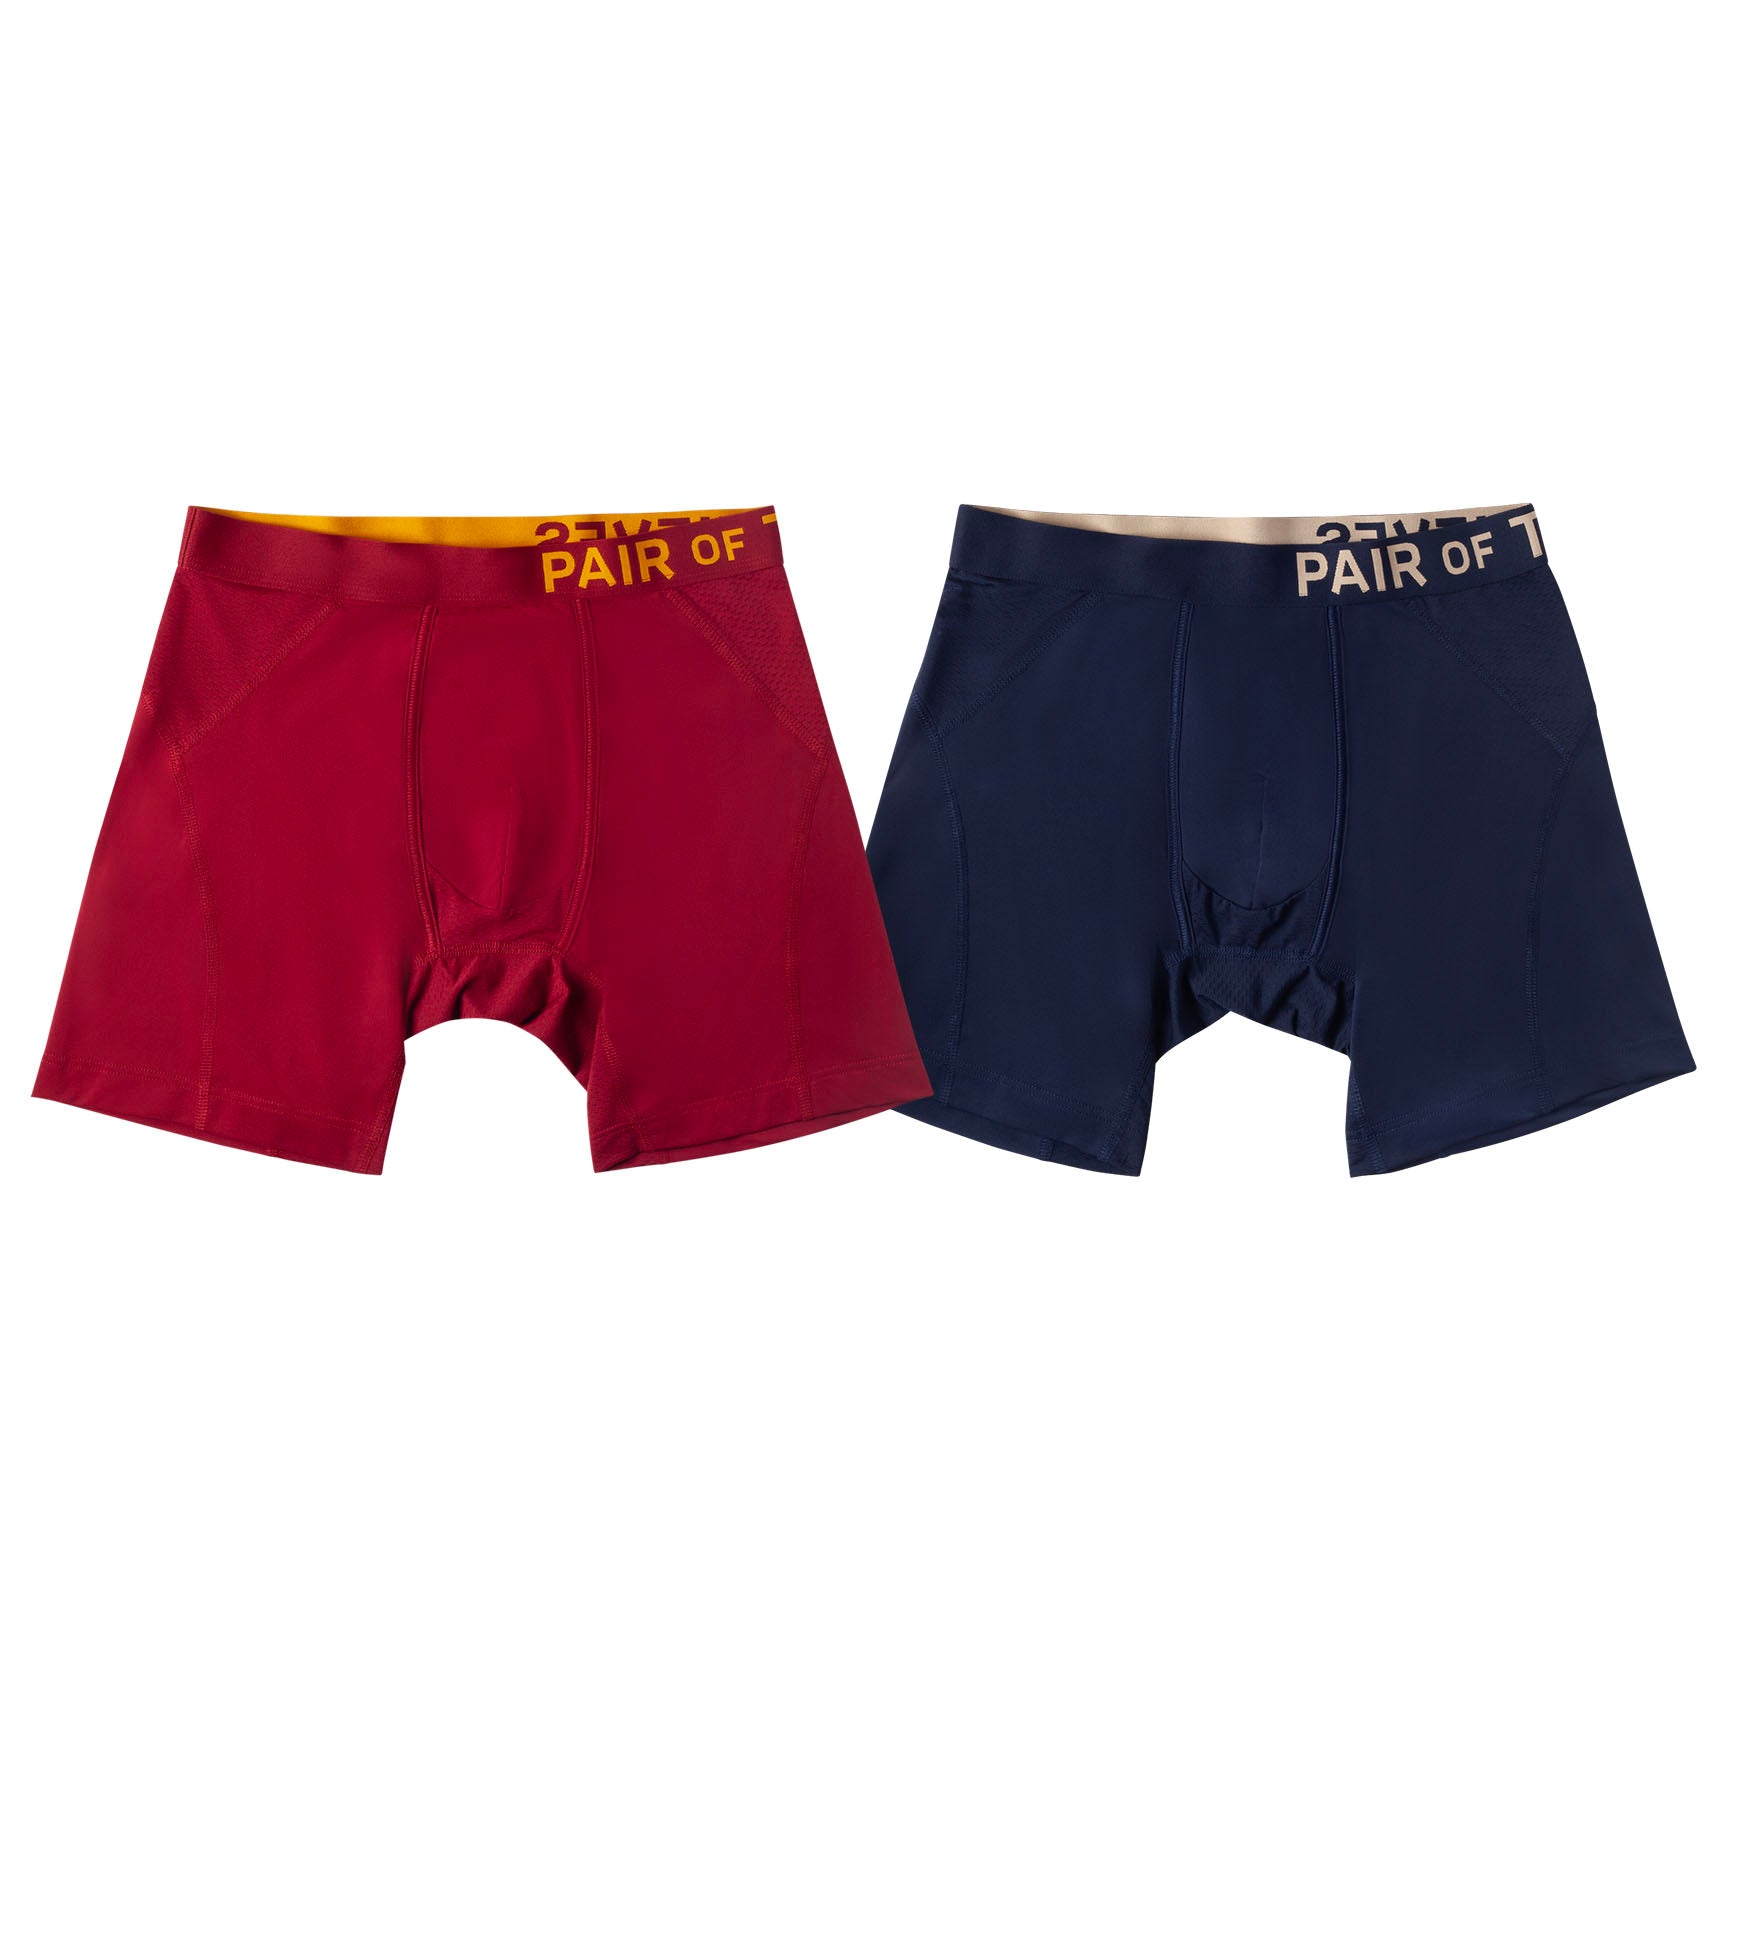 Pair of Thieves Cave Painting Boxer Brief 2-Pack